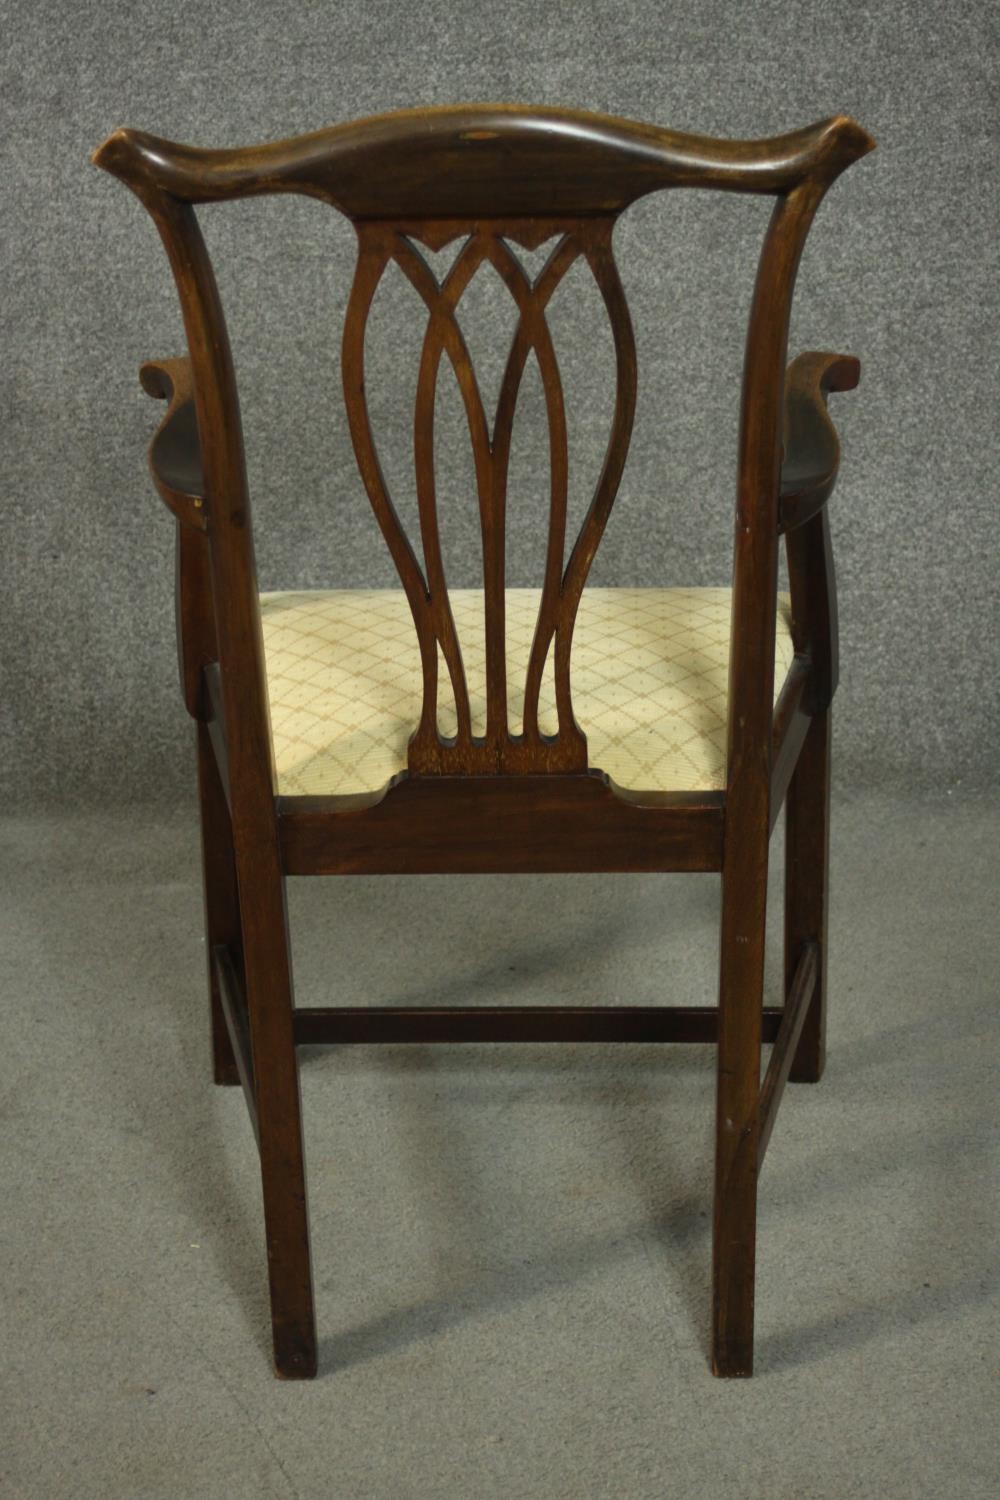 A set of six 18th century style mahogany dining chairs including two carvers and four side chairs, - Image 6 of 13